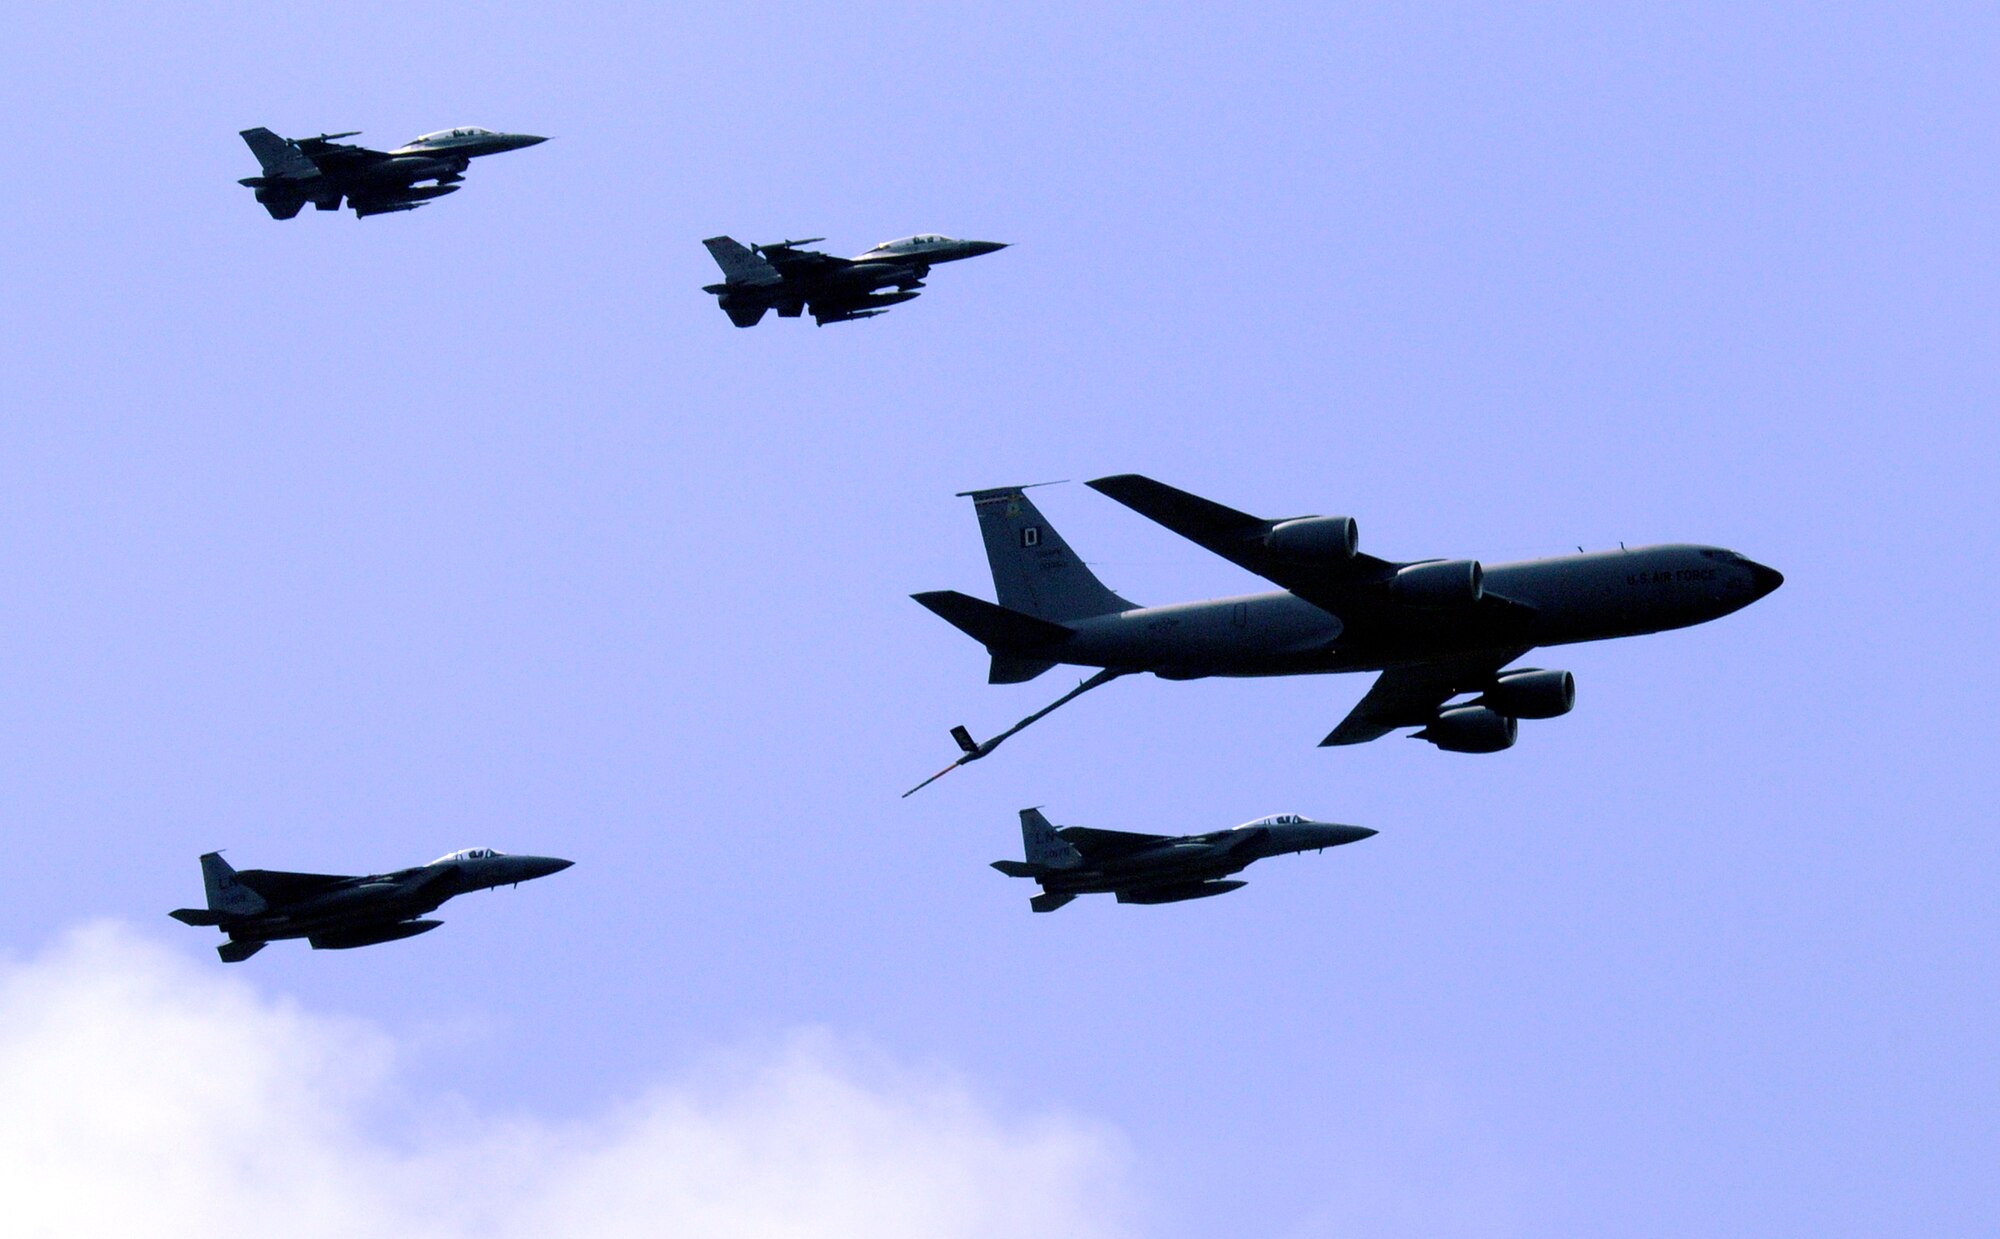 A formation of F-16s, F-15s, and a KC-135 fly over RAF Mildenhall during the 75th Anniversary of the base May 15, 2009.  The five aircraft formation was one part of a larger demonstration of air power, complete with simulated bomb impacts.  (U.S. Air Force photo by Senior Airman Christopher L. Ingersoll)